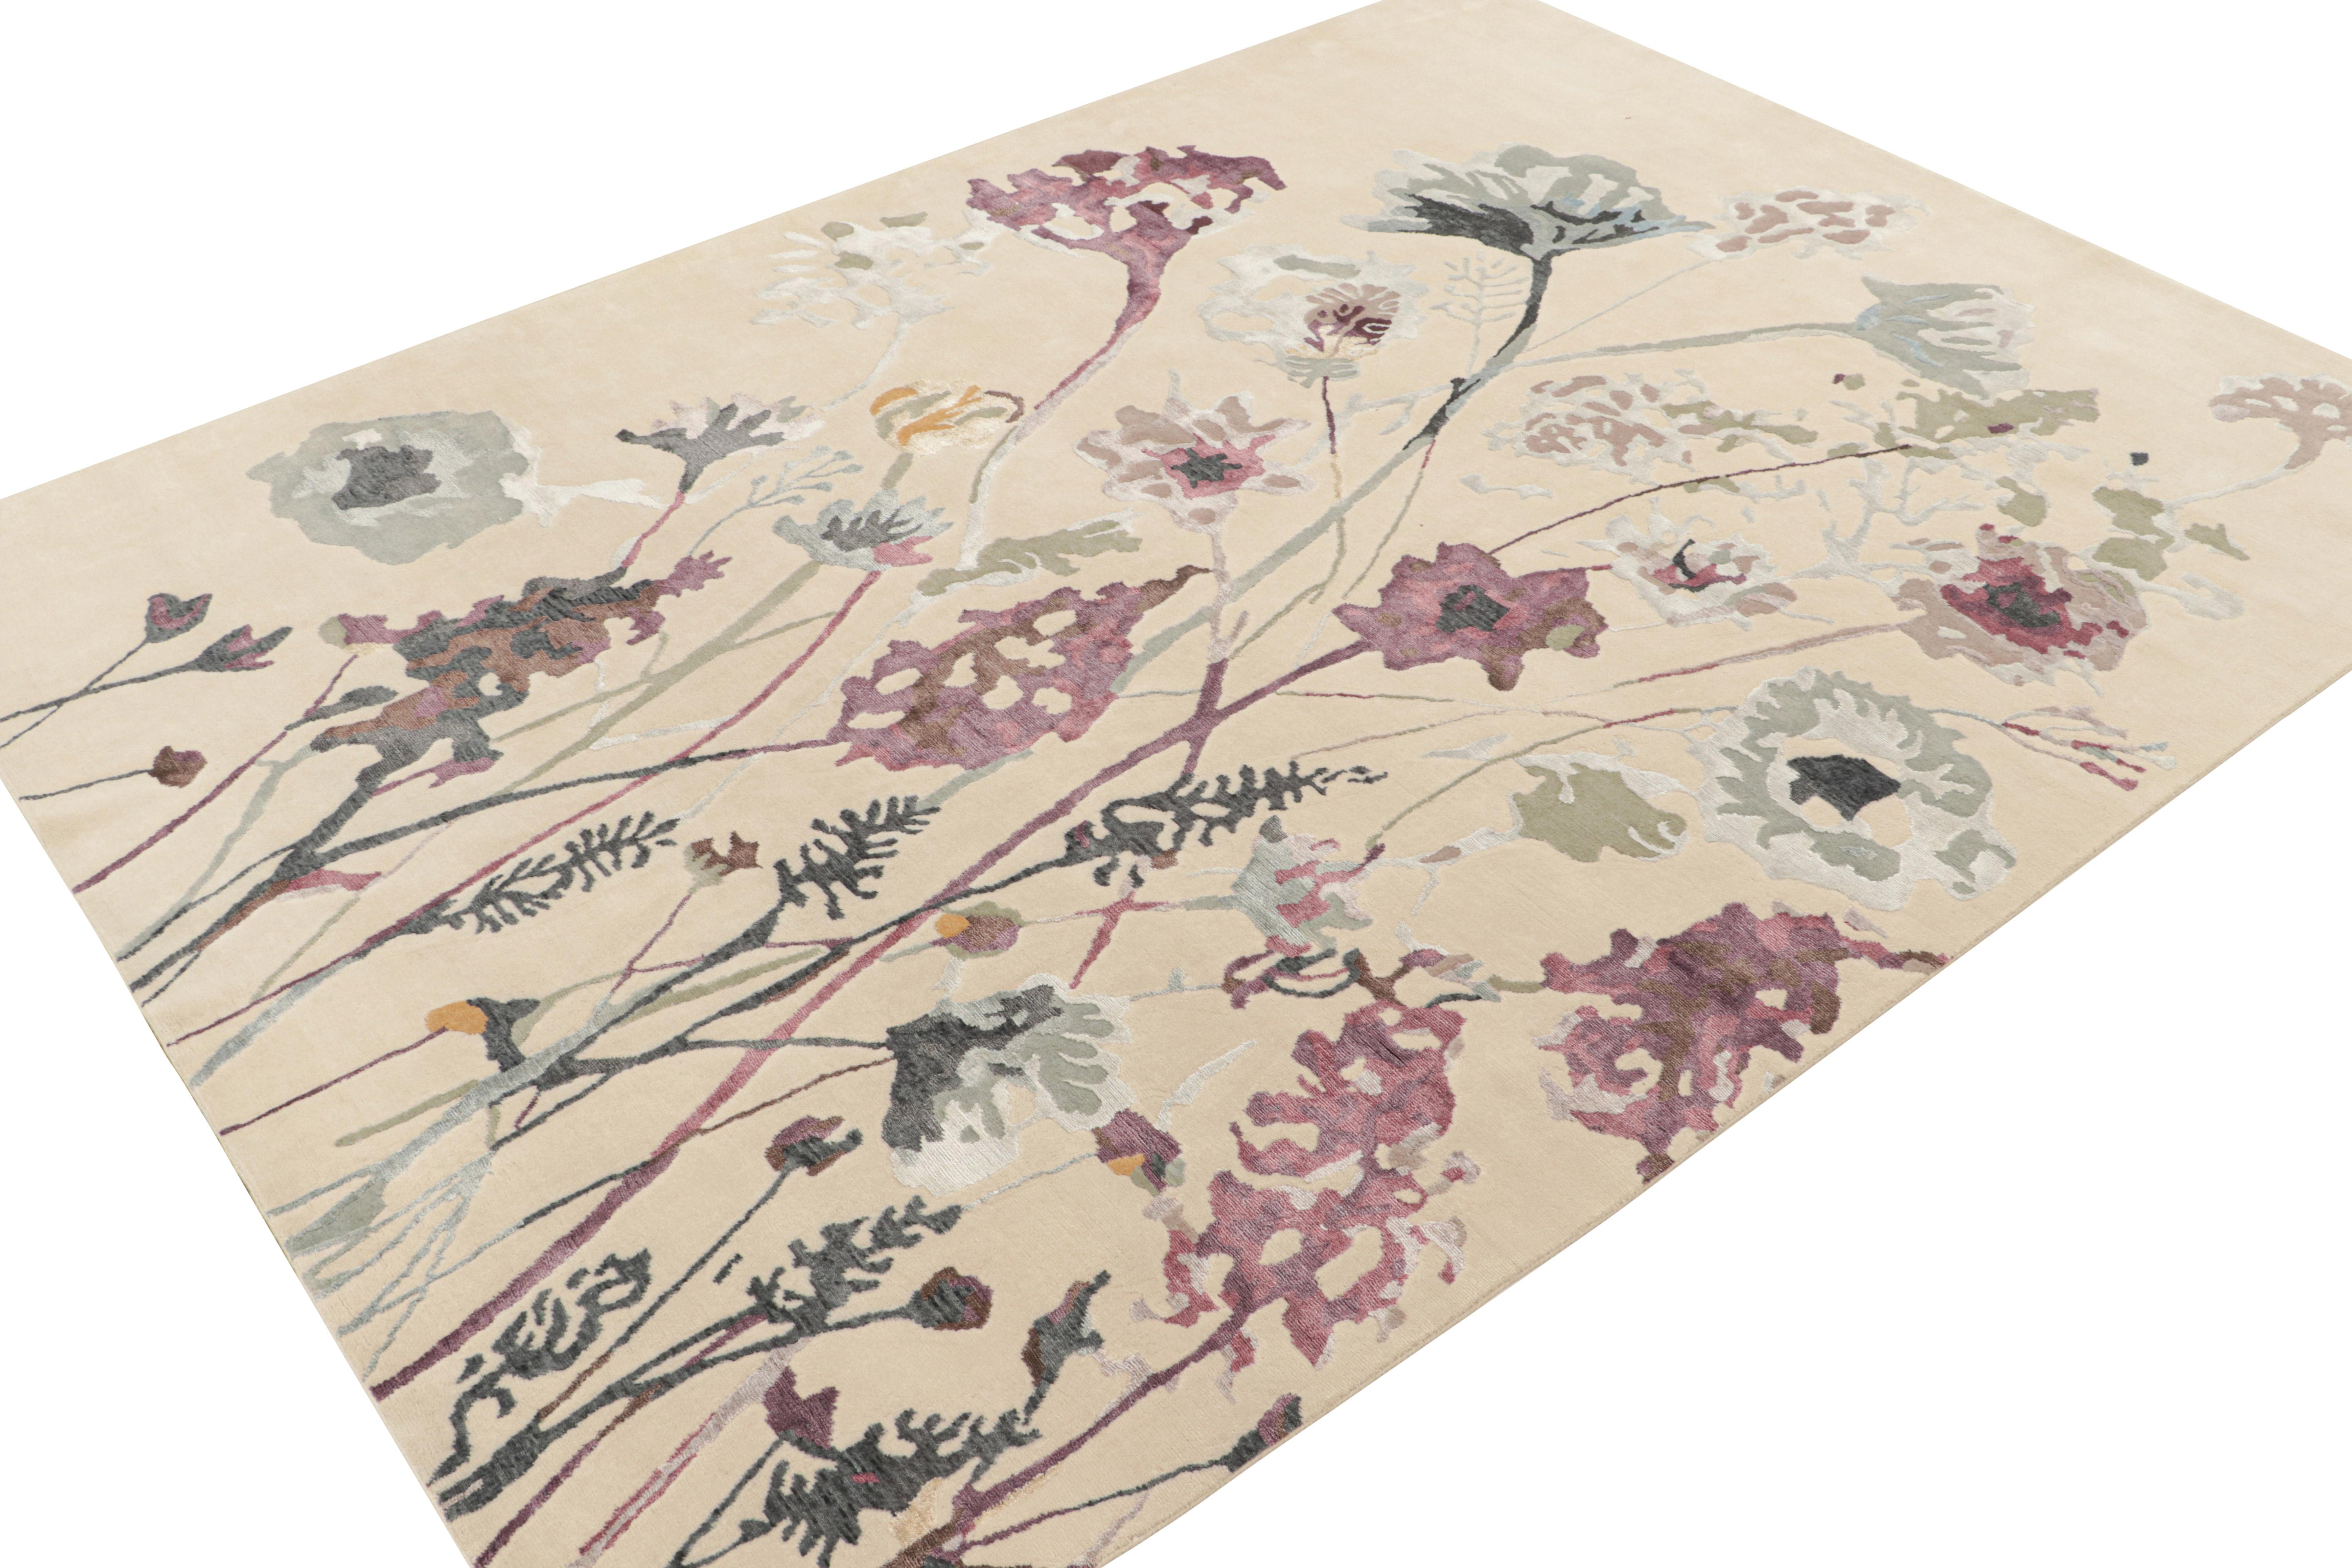 This contemporary 9x12 rug is an exciting new addition to Rug & Kilim’s Modern Collection. Hand-knotted in wool, silk and cotton, its design is a playful take on classic botanical rug designs.

Further on the Design: 

This particular rug favors